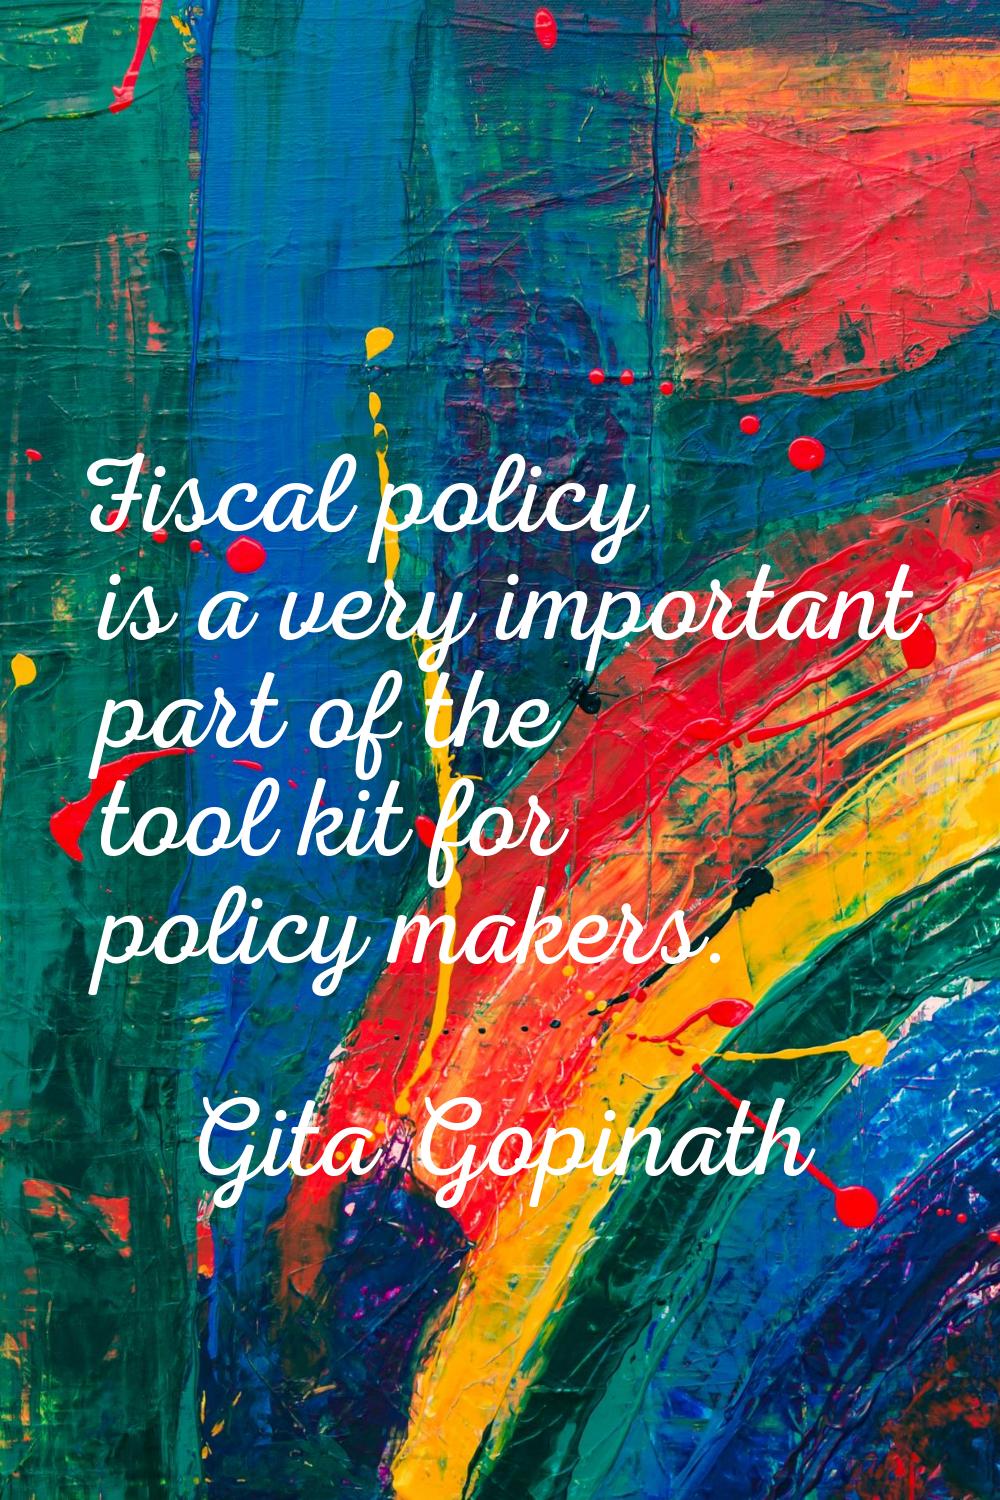 Fiscal policy is a very important part of the tool kit for policy makers.